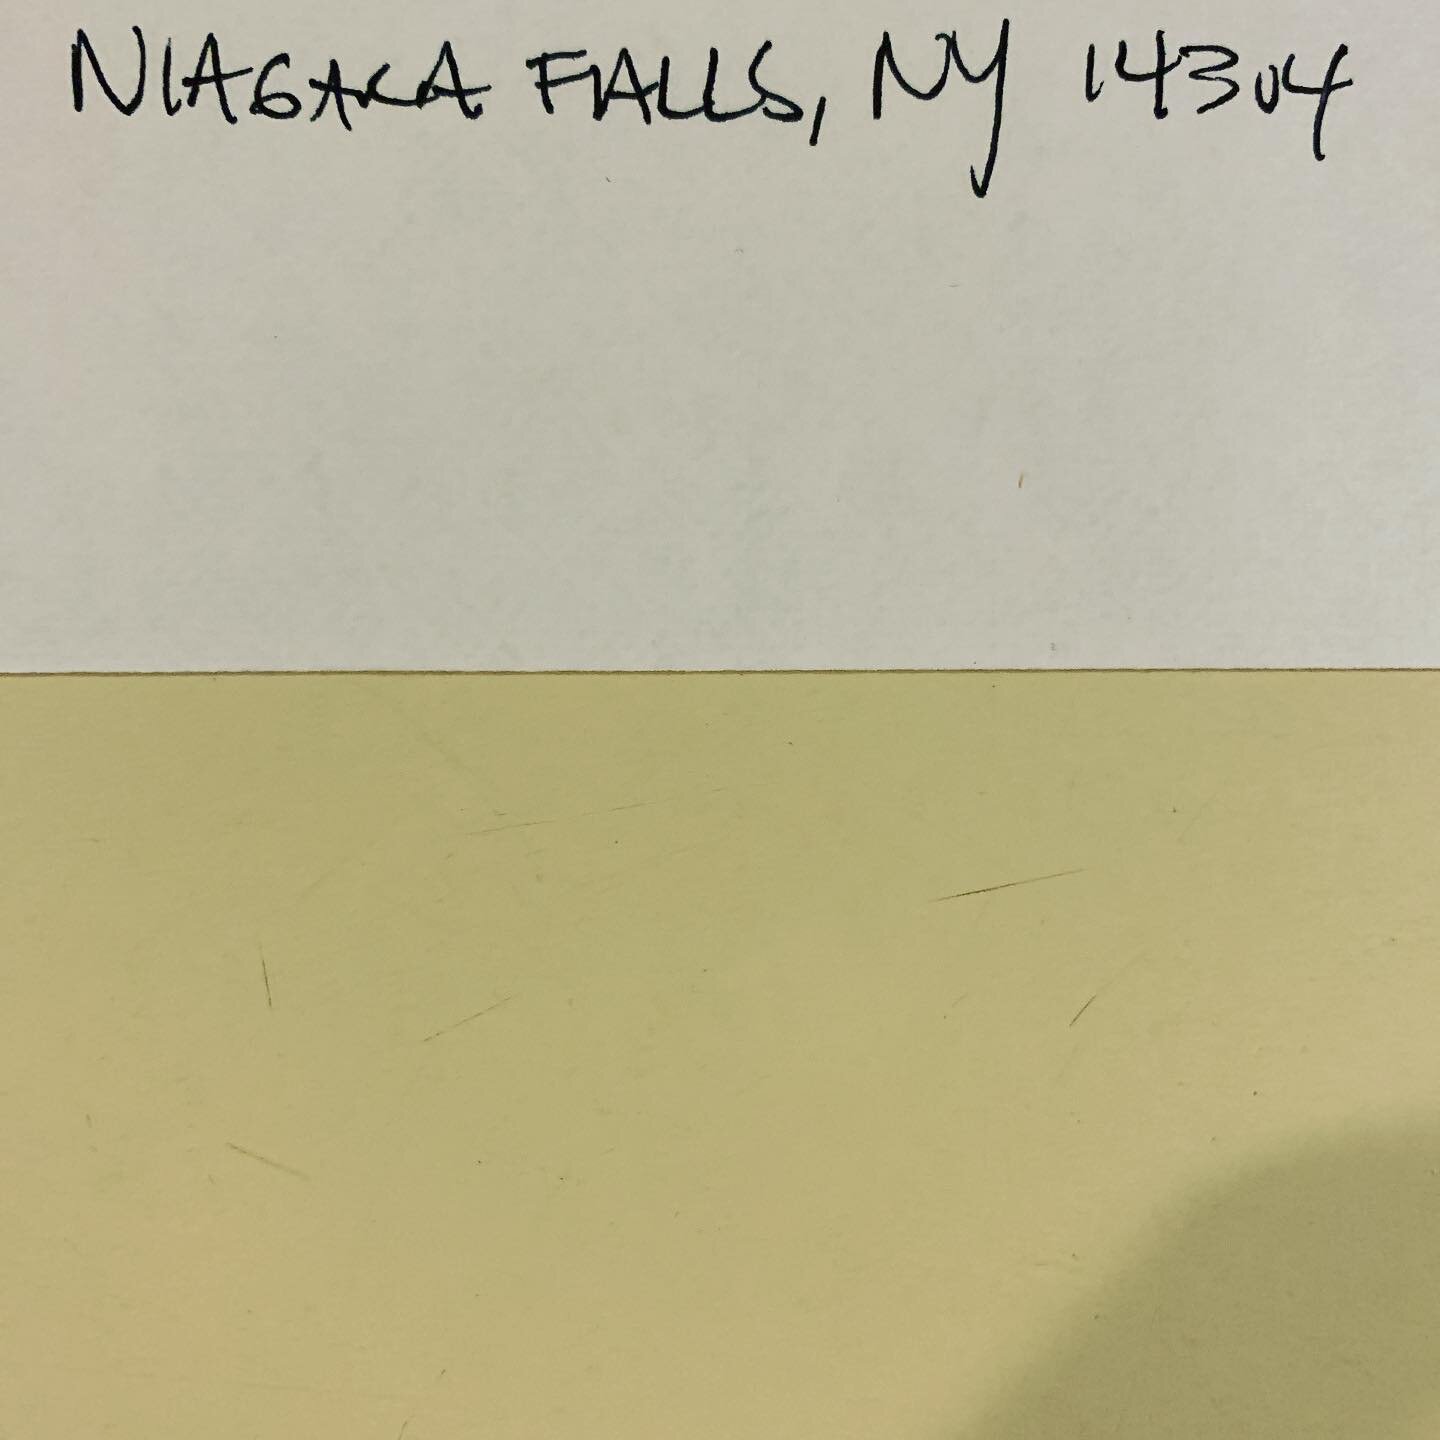 Got an order addressed to Niagara Falls. I didn&rsquo;t know it was an actual town, just thought it was a wide, scenic waterfall. #niagarafalls #waterfalls